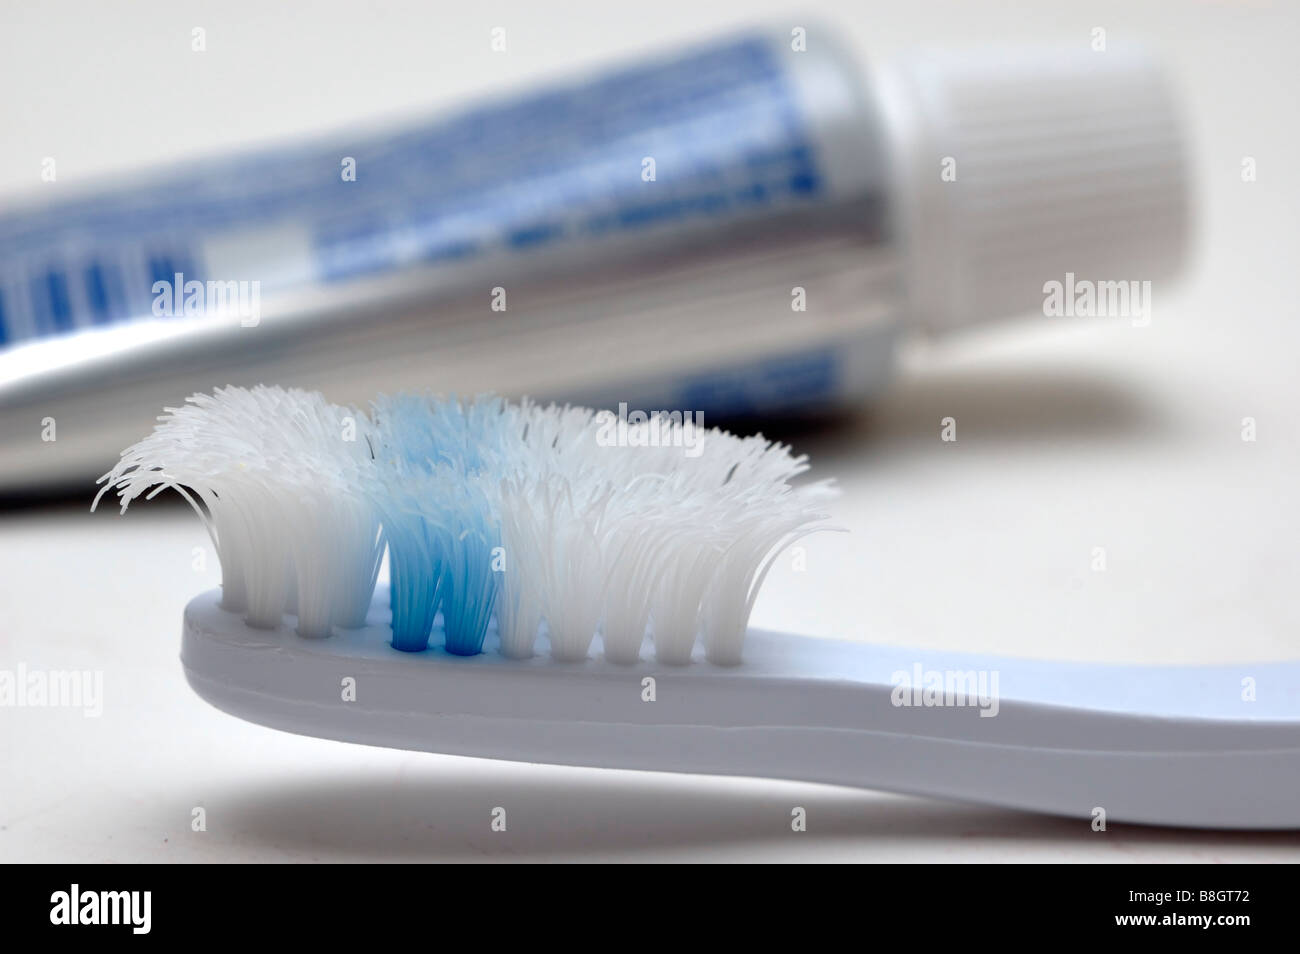 Closeup of a very worn toothbrush with a tube of toothpaste in the background Stock Photo